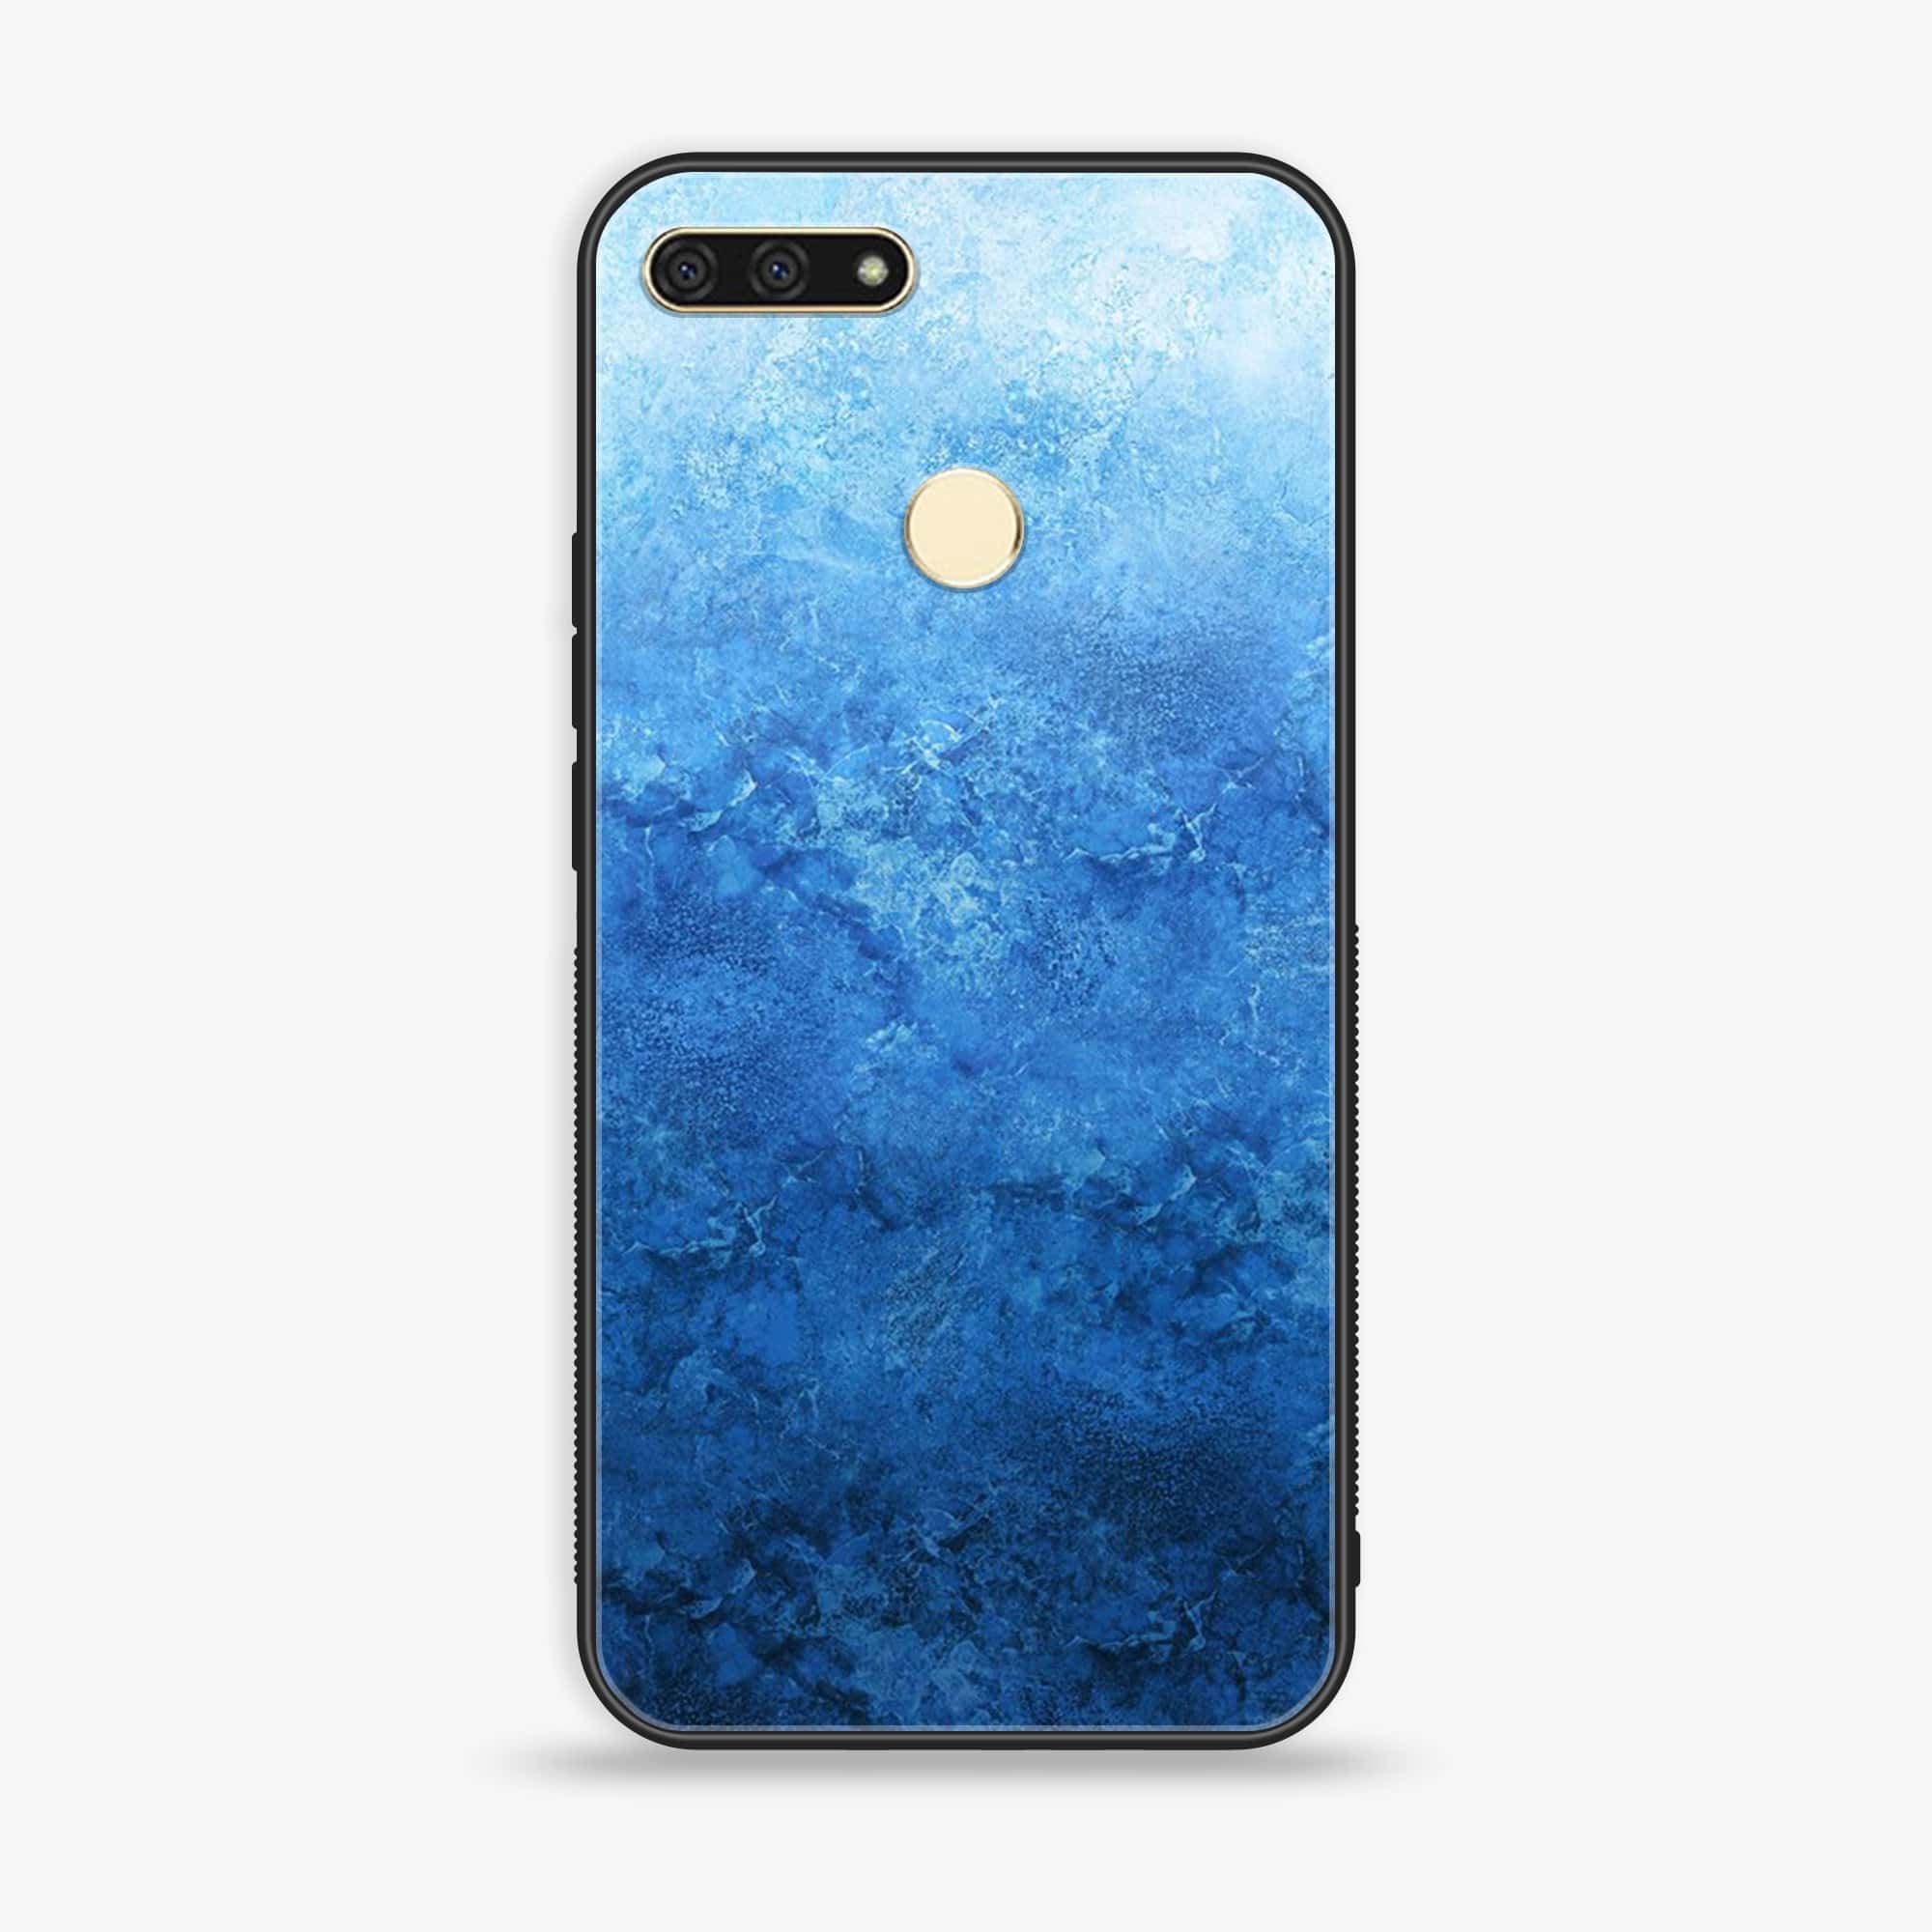 Honor 7A -  Blue Marble Series - Premium Printed Glass soft Bumper shock Proof Case